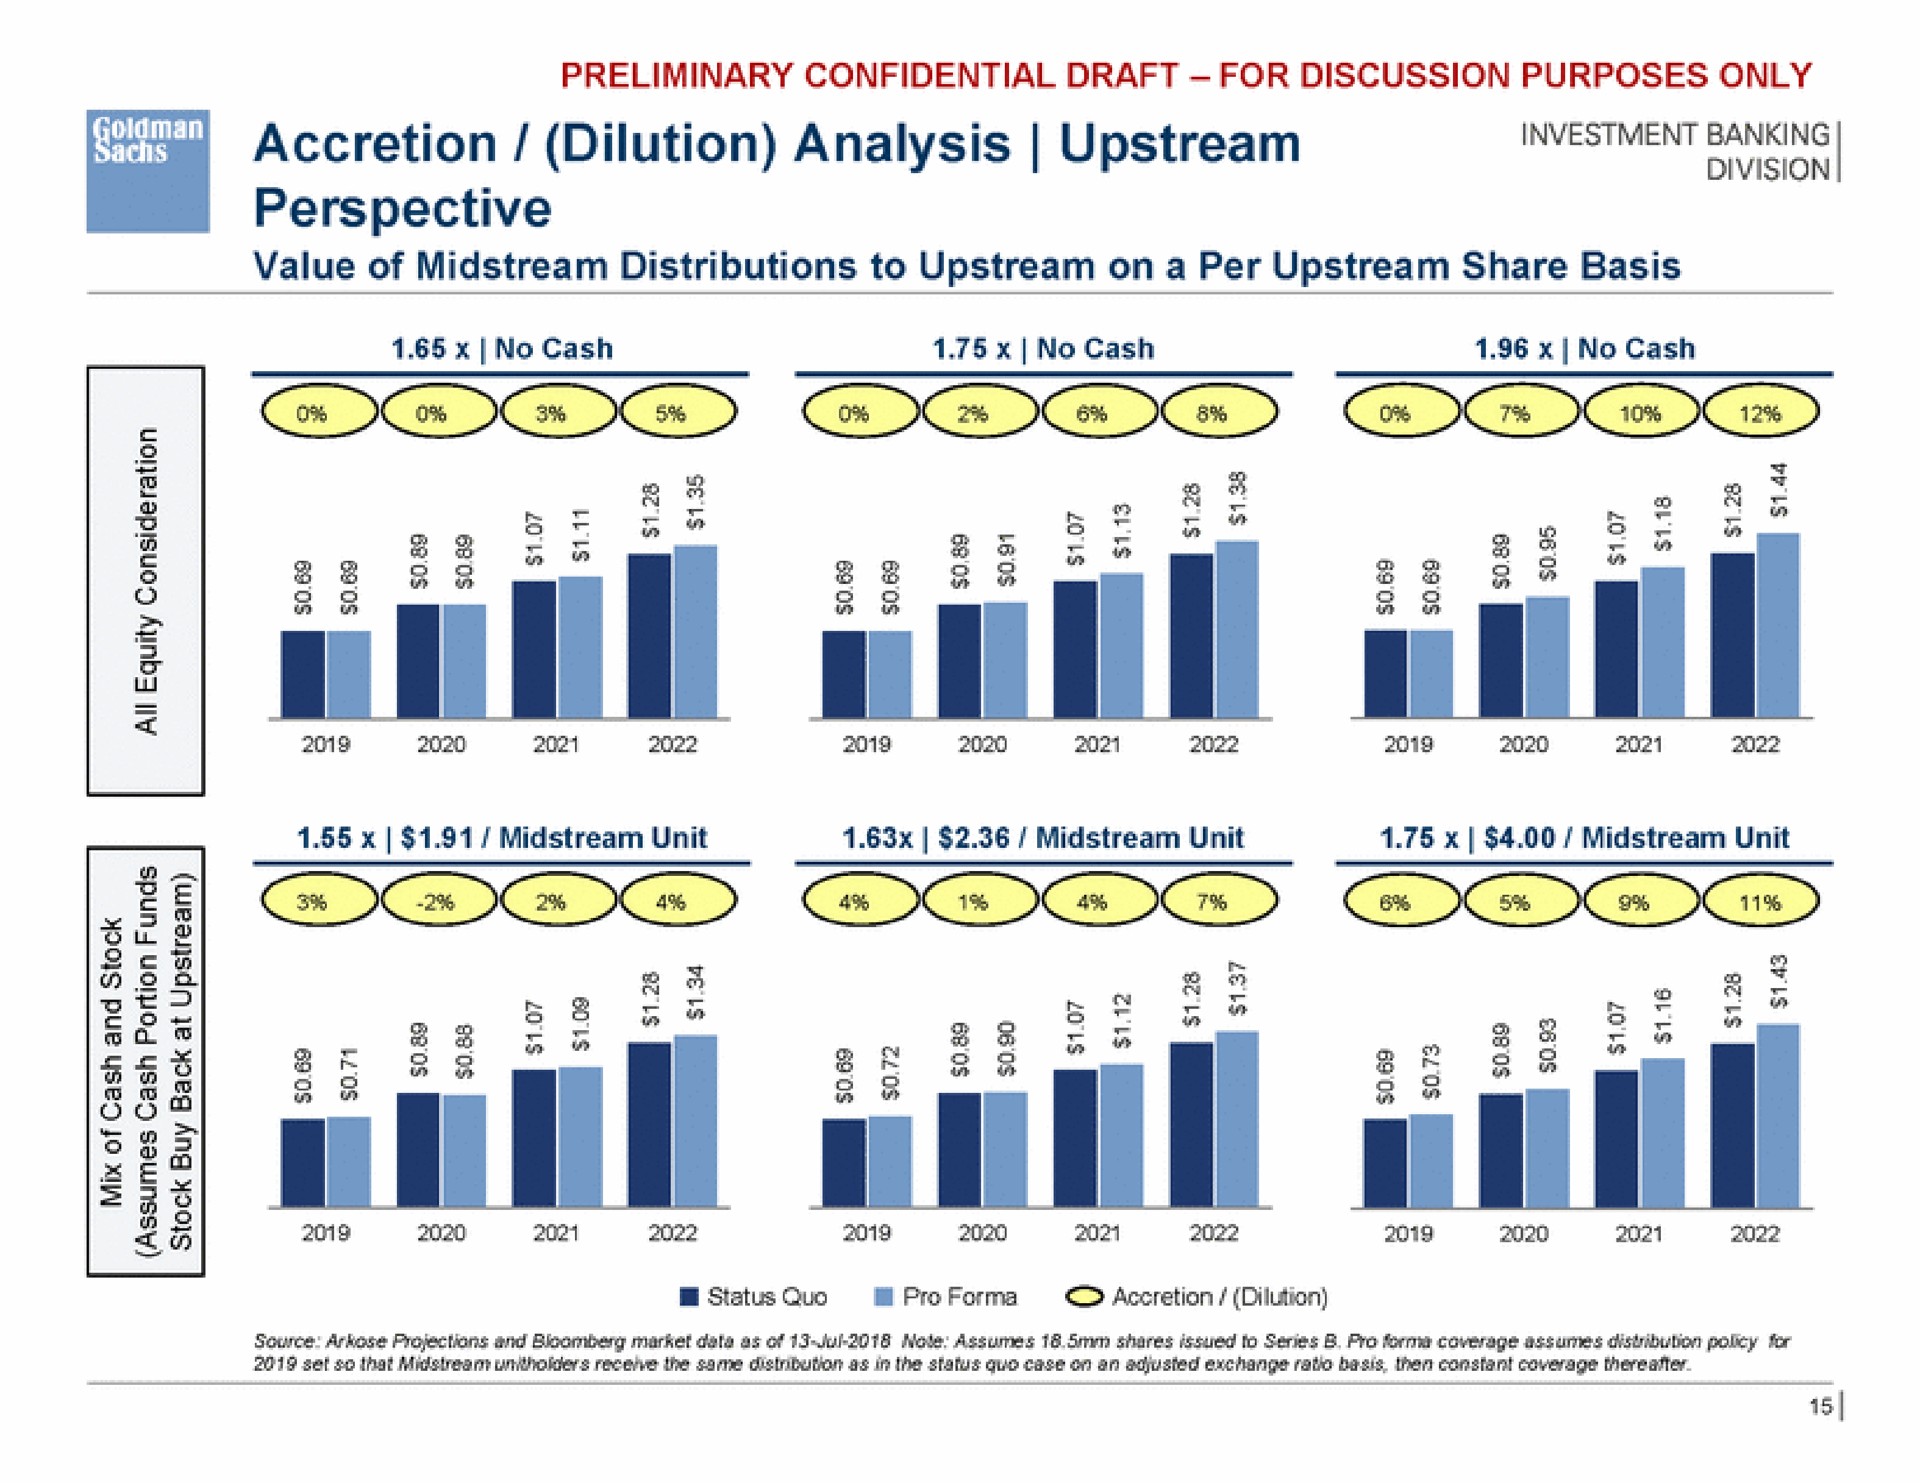 accretion dilution analysis upstream perspective cod coe a a a | Goldman Sachs